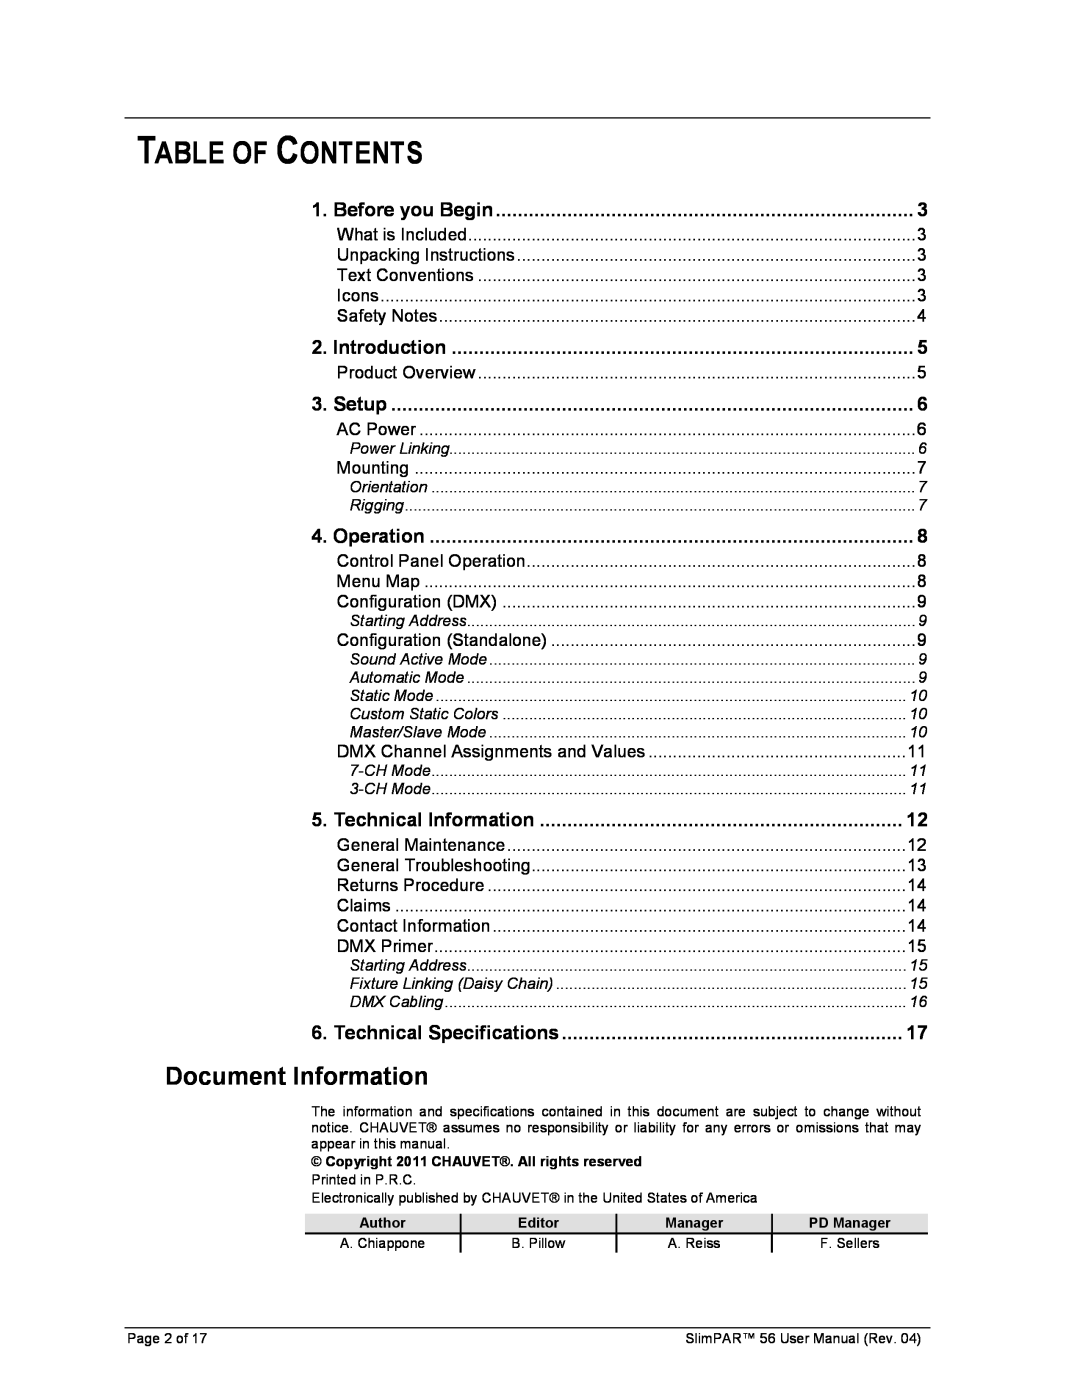 Chauvet 56 user manual Table Of Contents, Document Information 